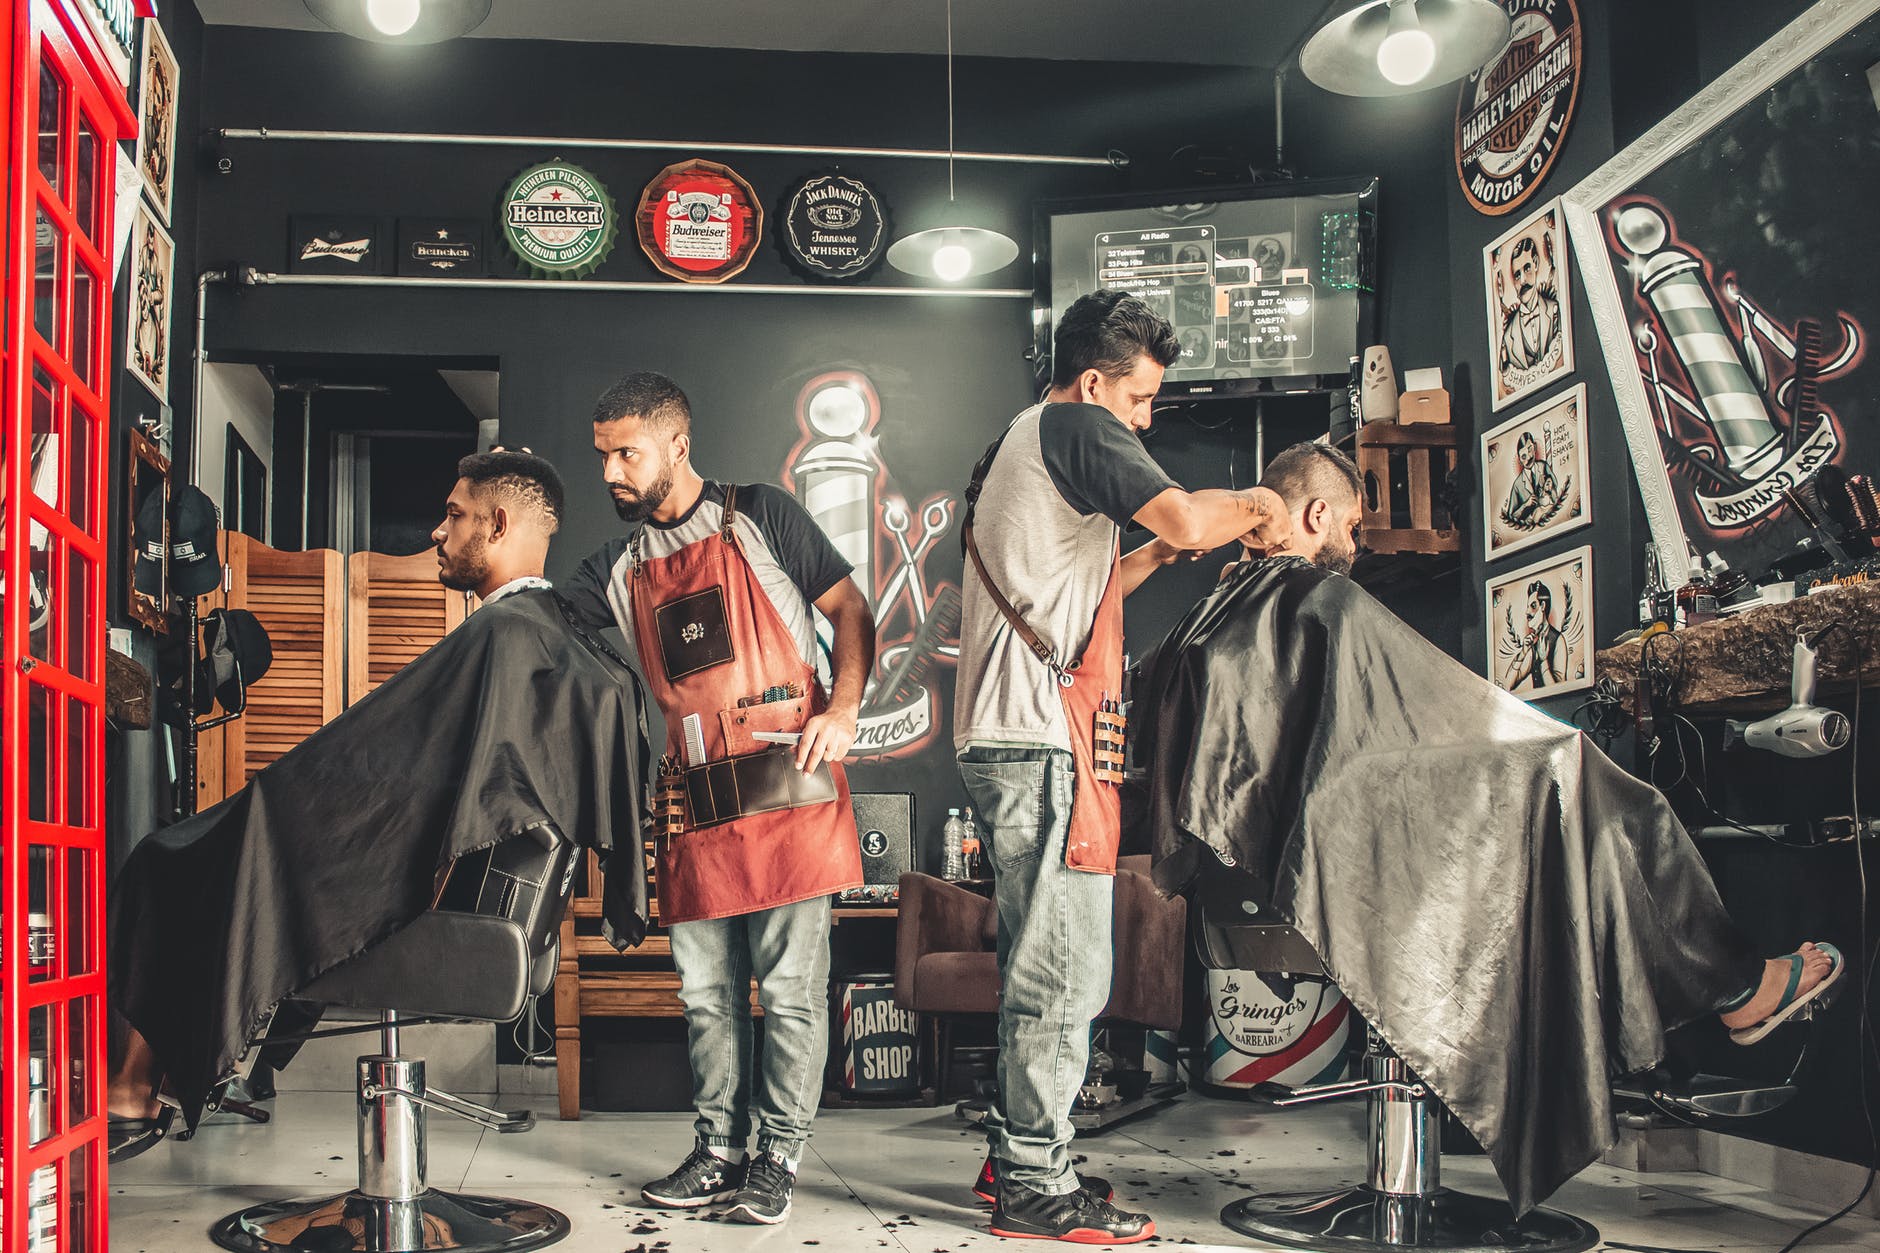 How To Own A Profitable Hair Salon Business In India